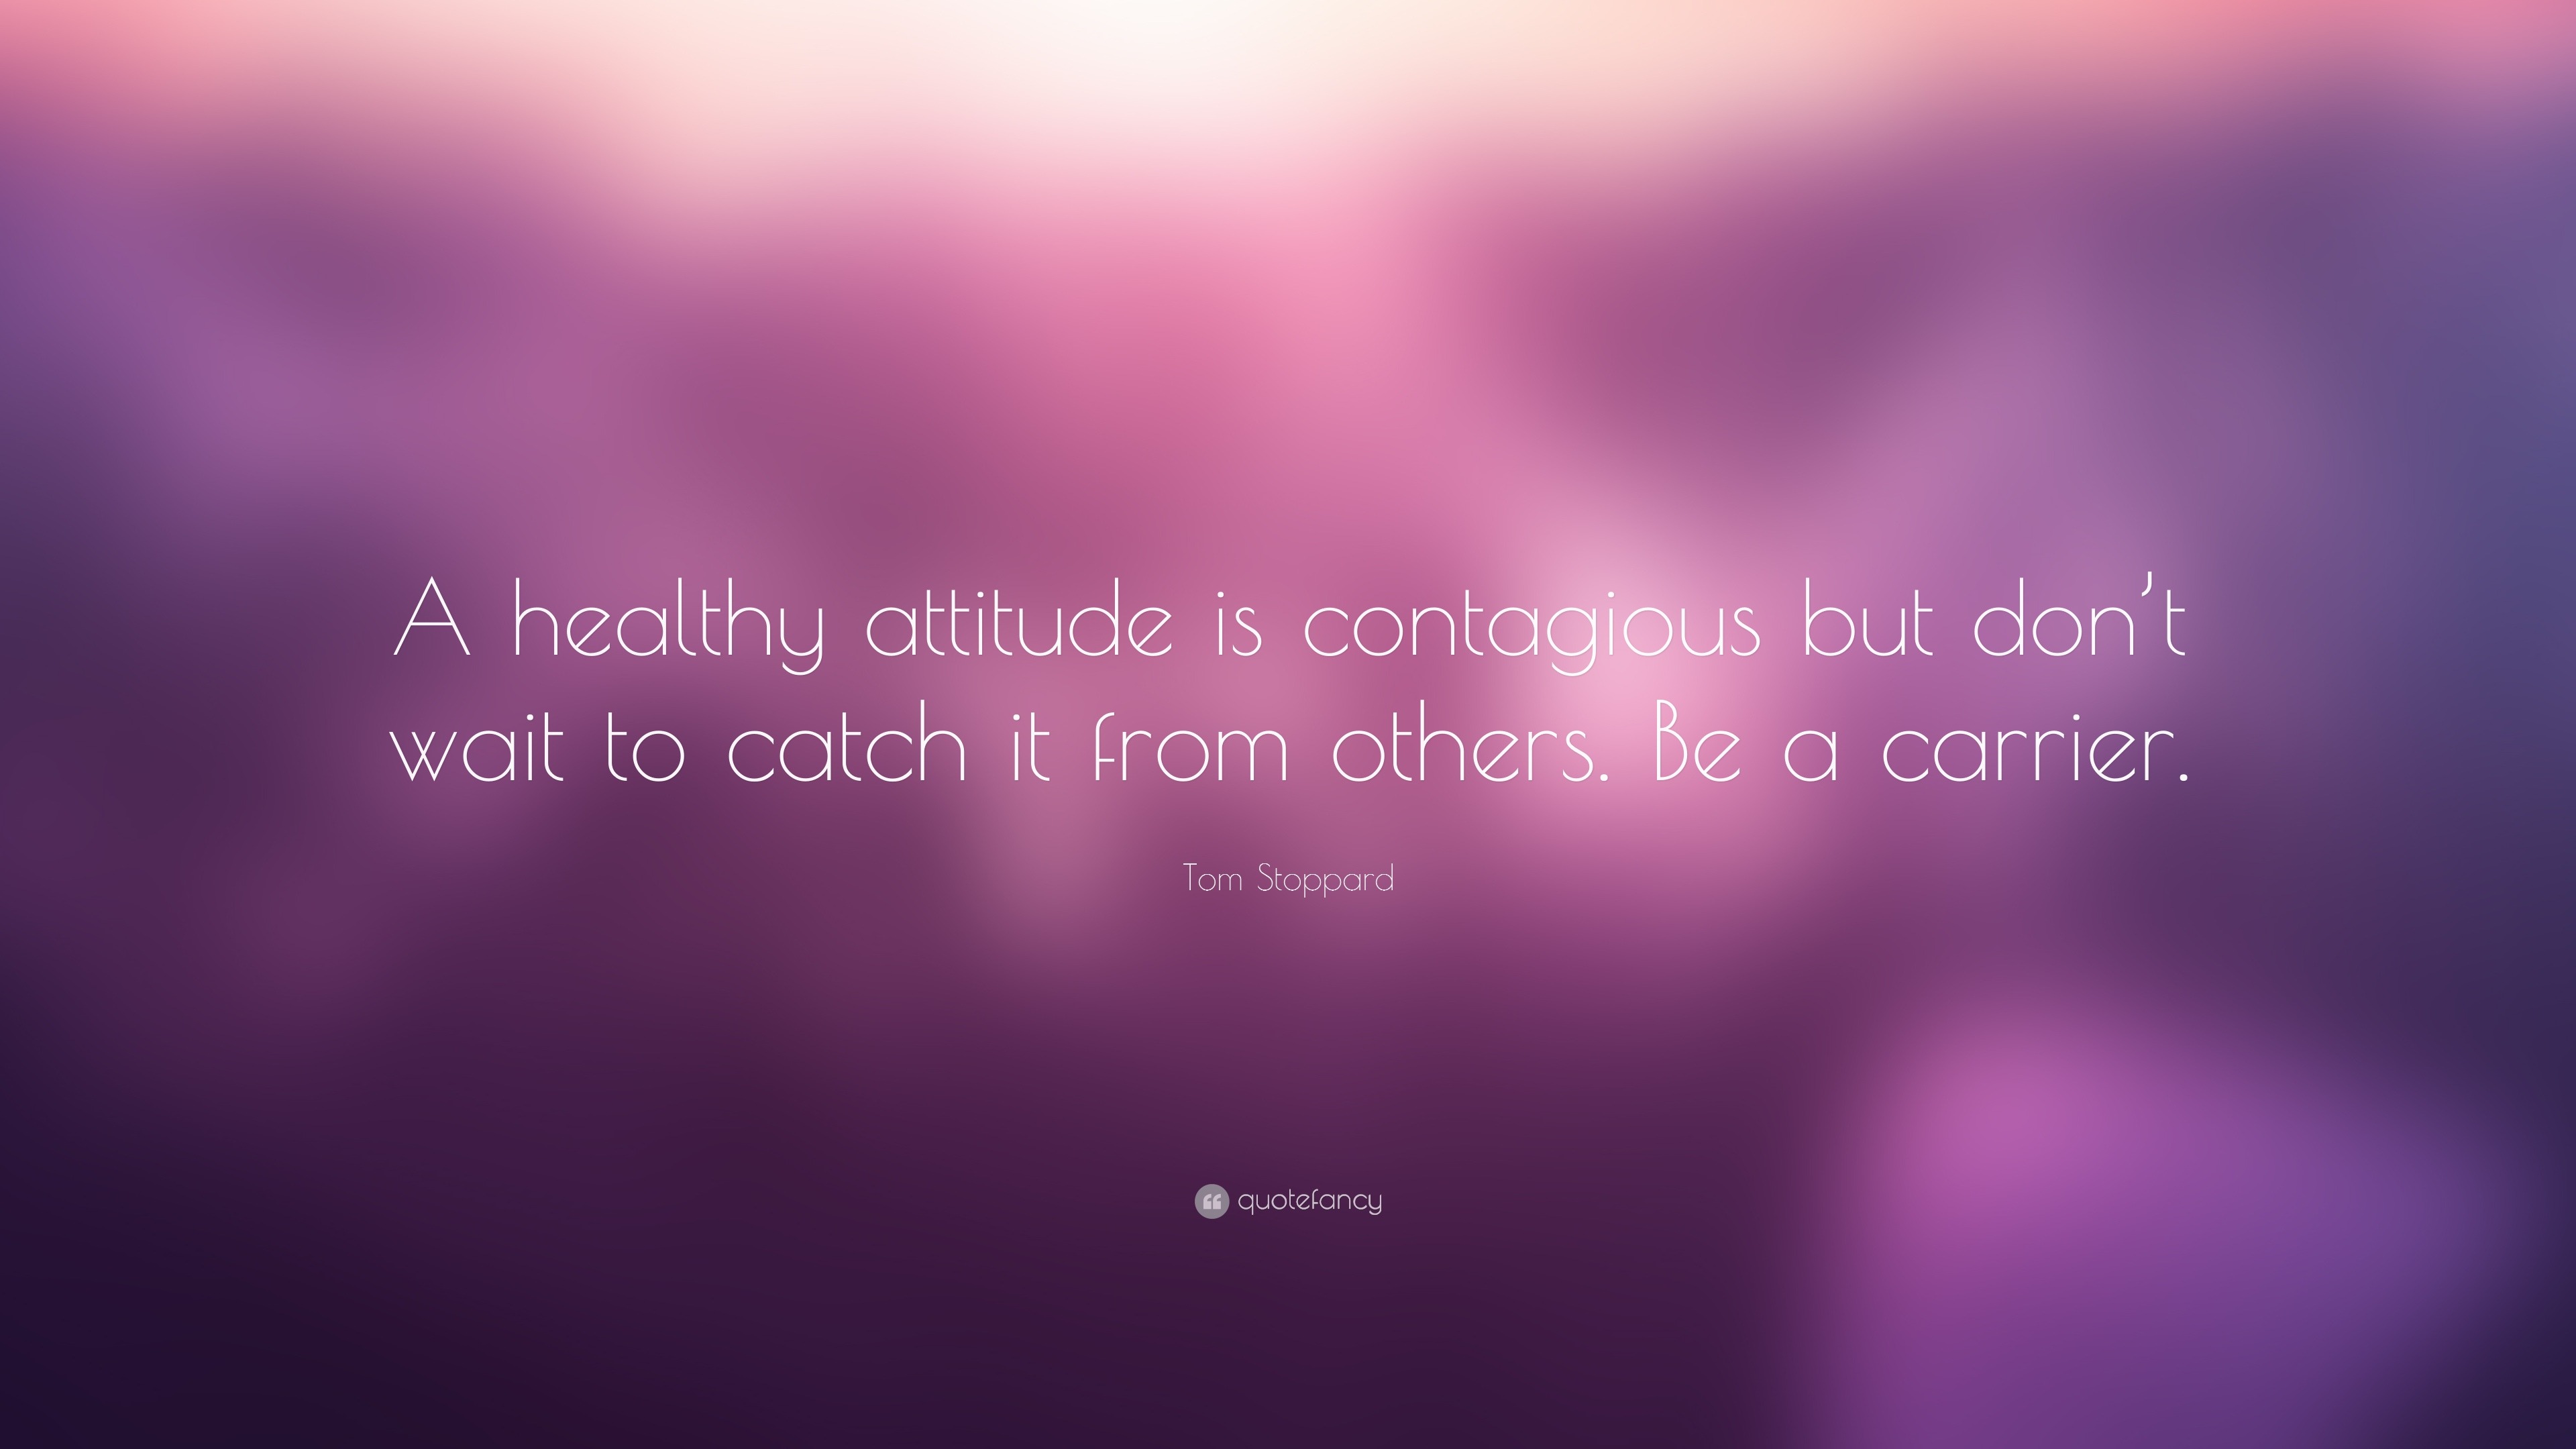 Tom Stoppard Quote: “A healthy attitude is contagious but don’t wait to ...